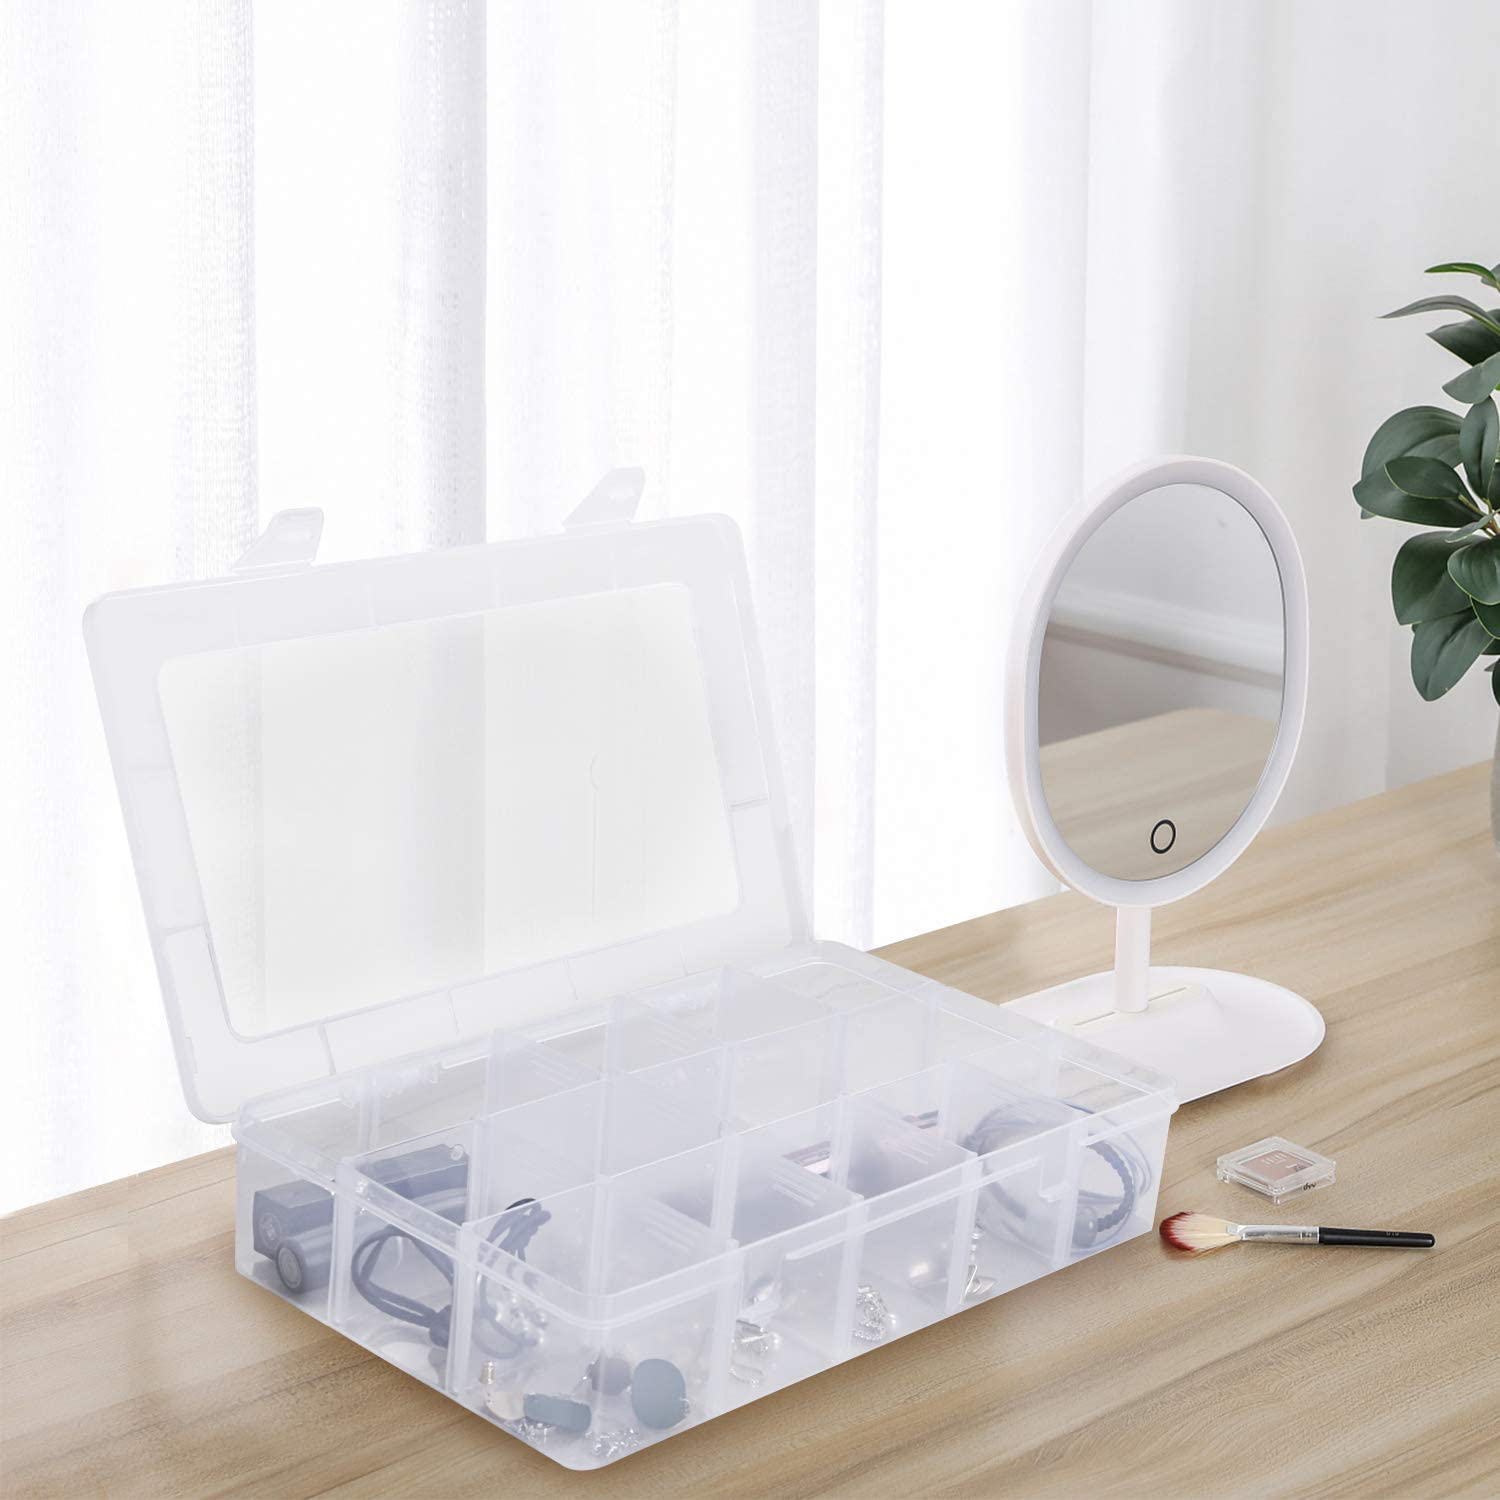 Large Grids Clear Plastic Jewelry Box Organizer Storage Container with Removable Dividers